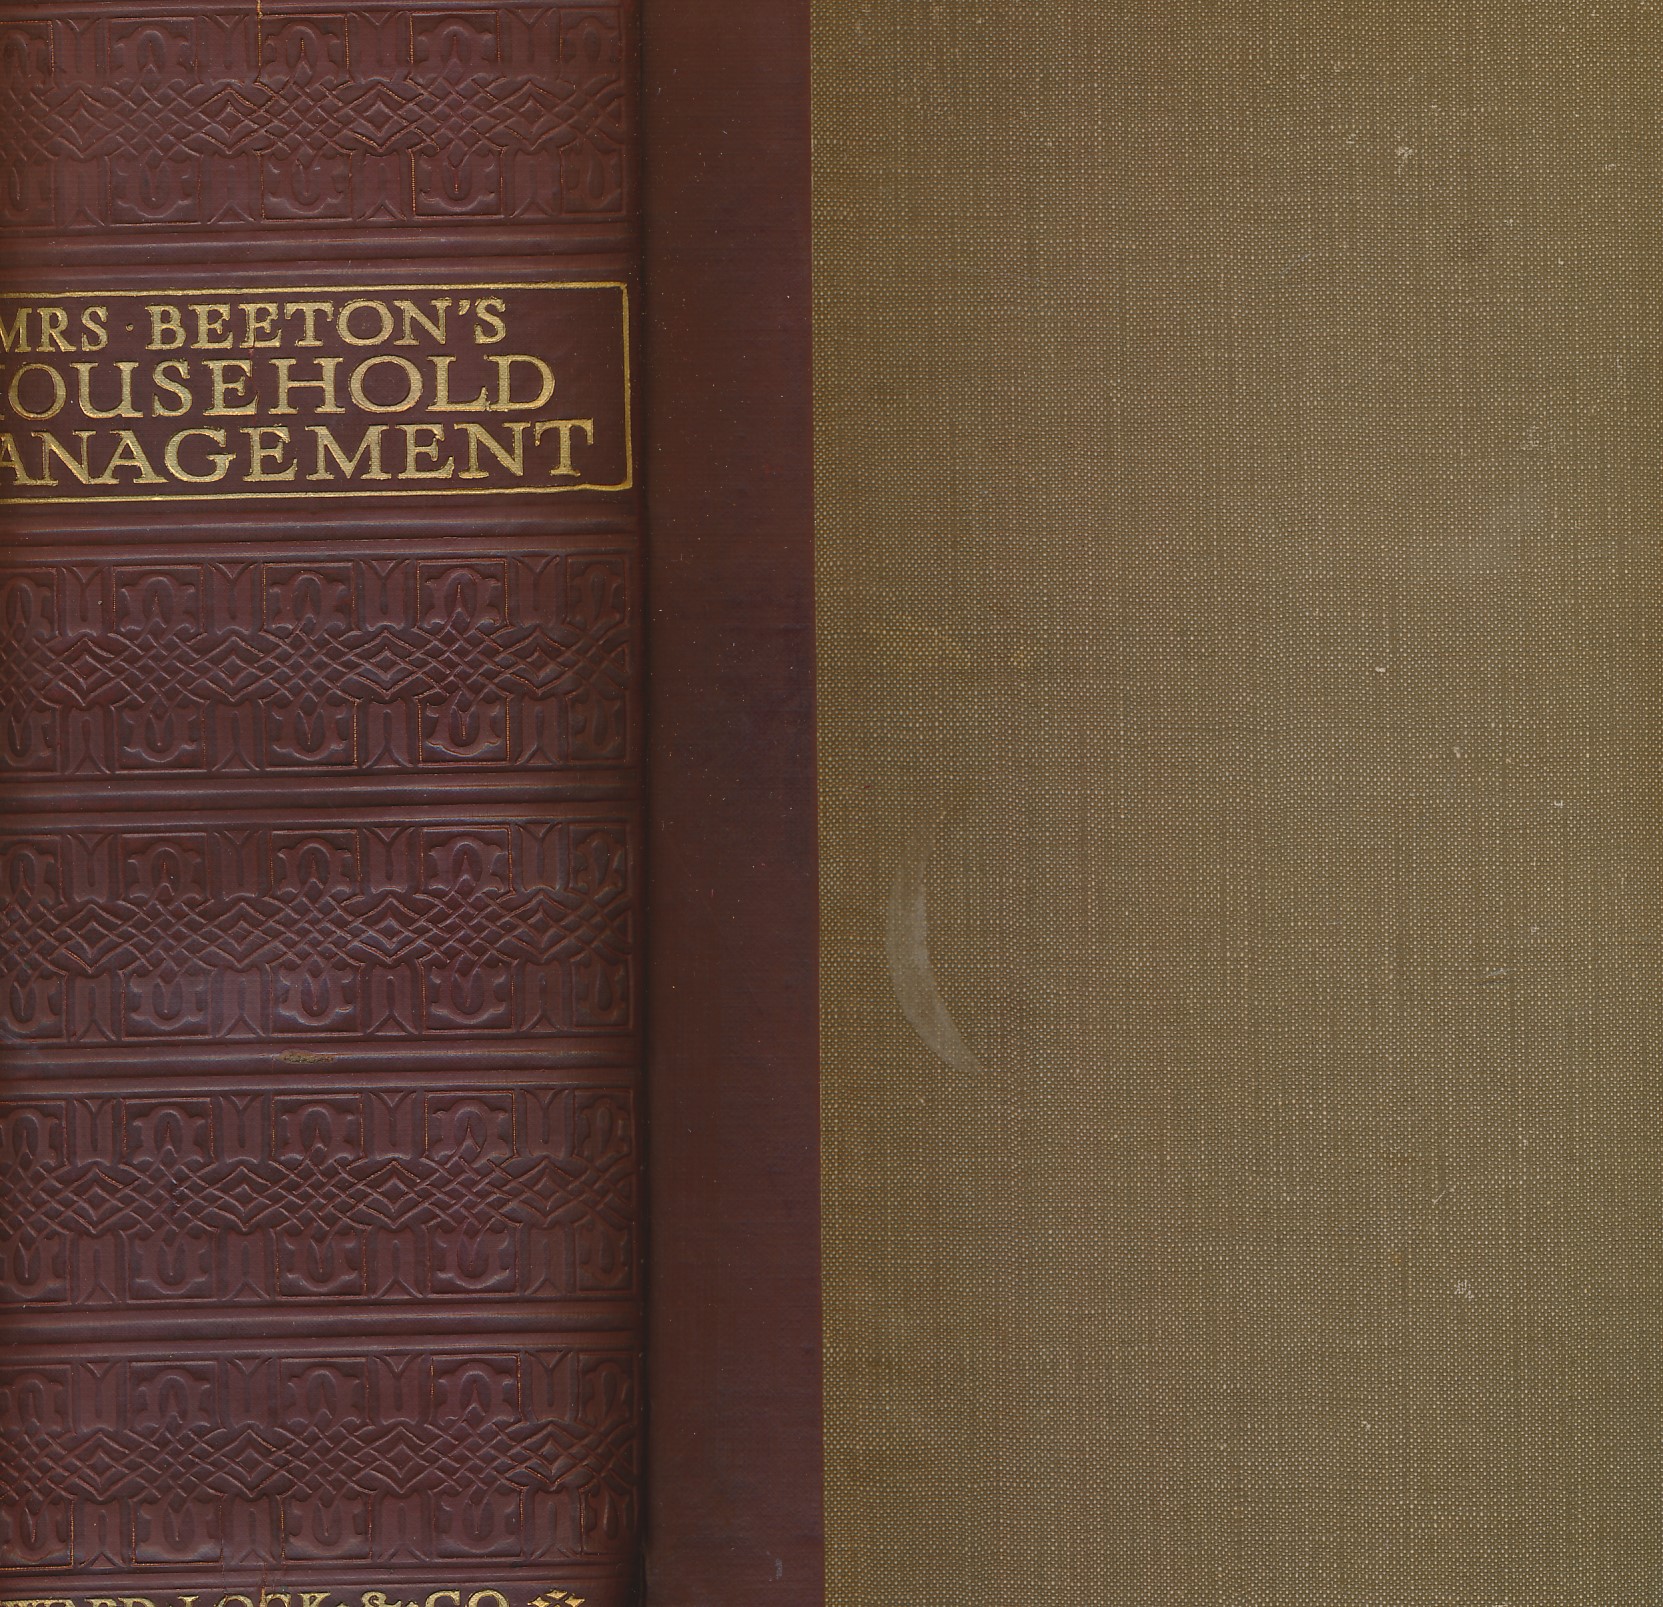 Mrs Beeton's Book of Household Management. [1933] New Edition.